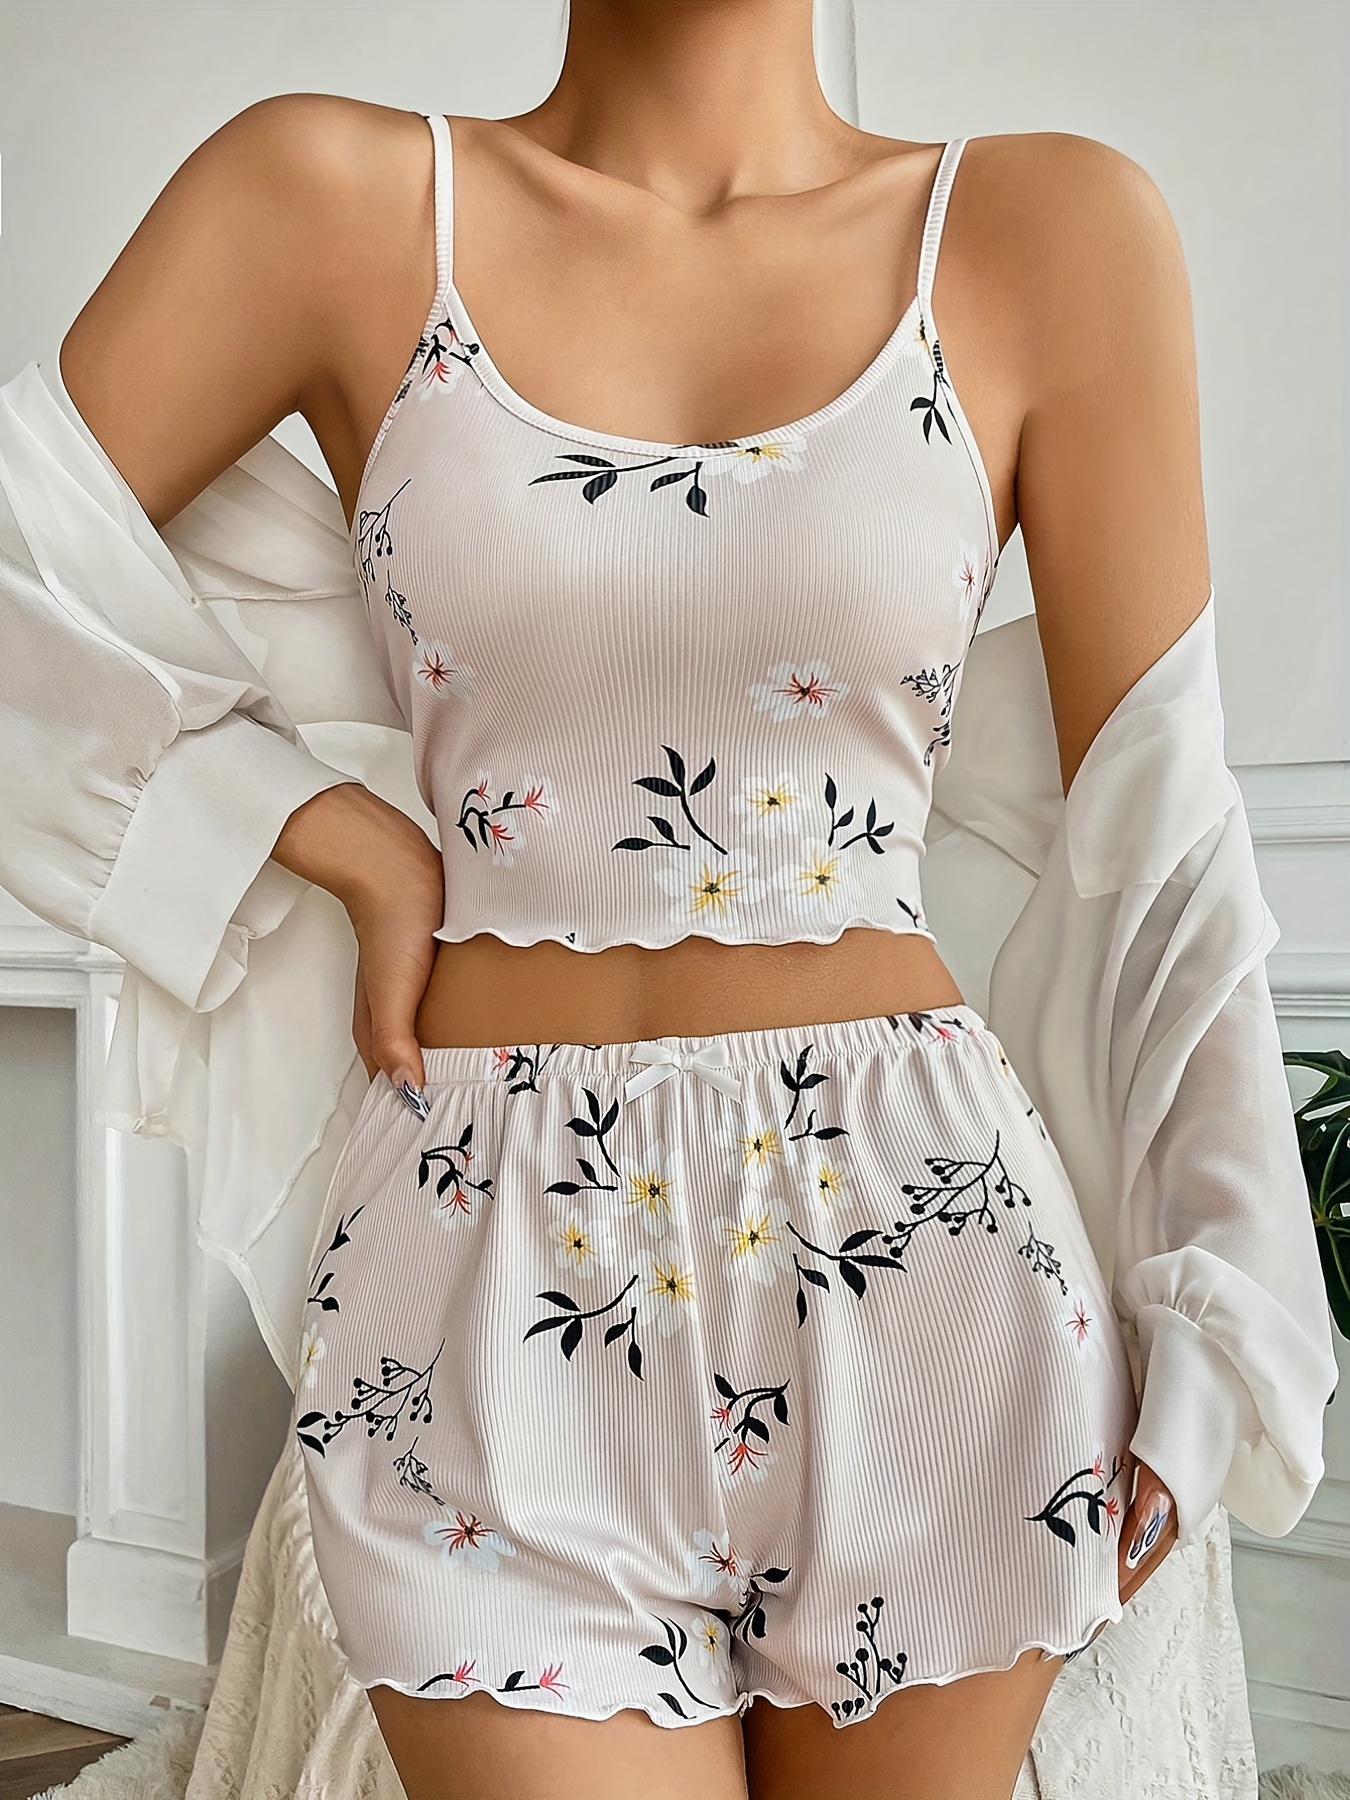 Pyjama cami top and shorts - White/Floral - Ladies